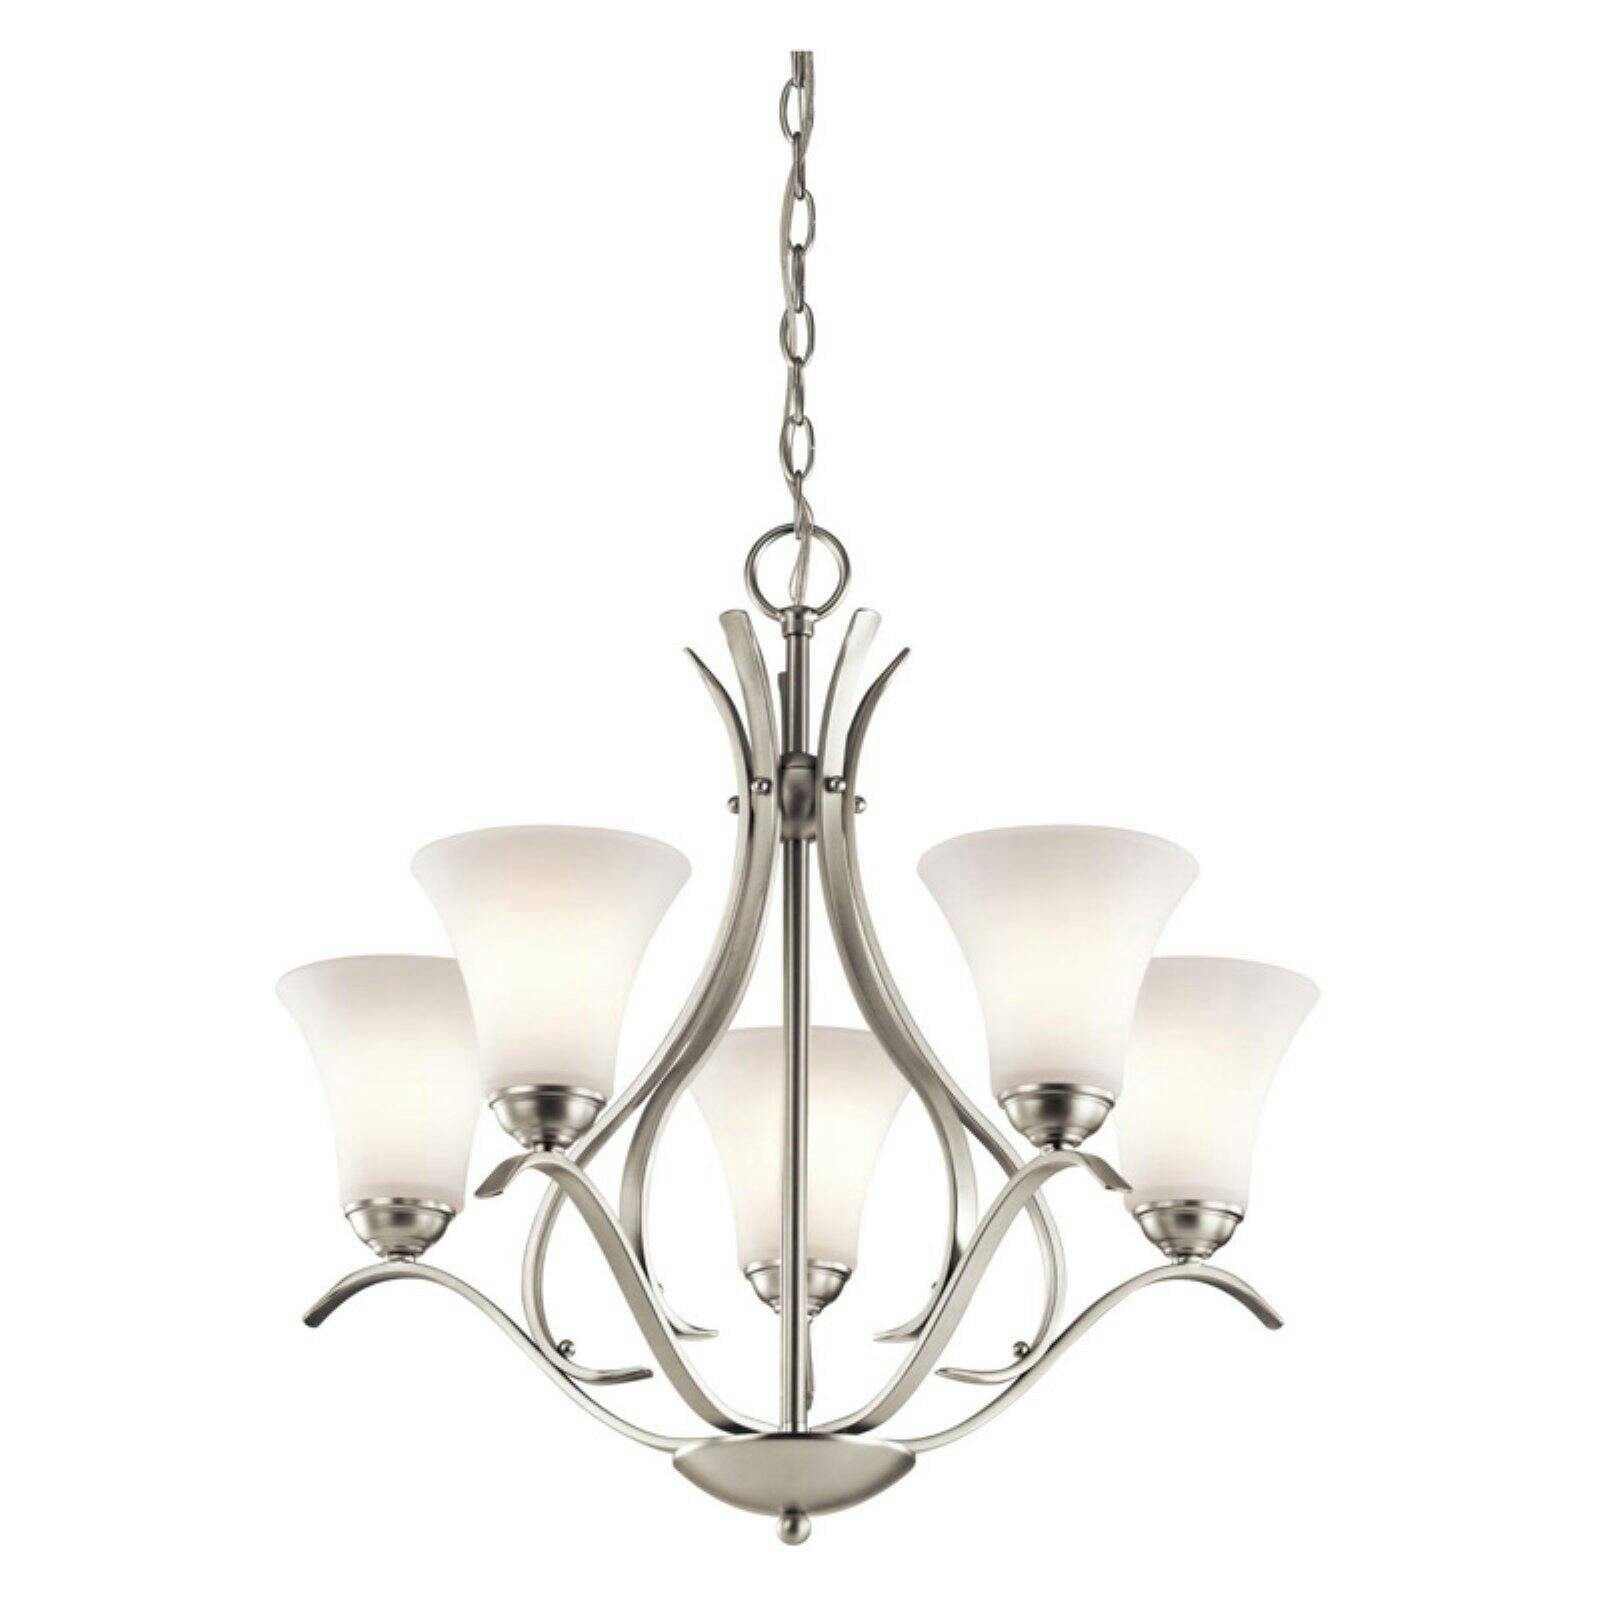 Elegant 24.5" Brushed Nickel Chandelier with White Bell Shades